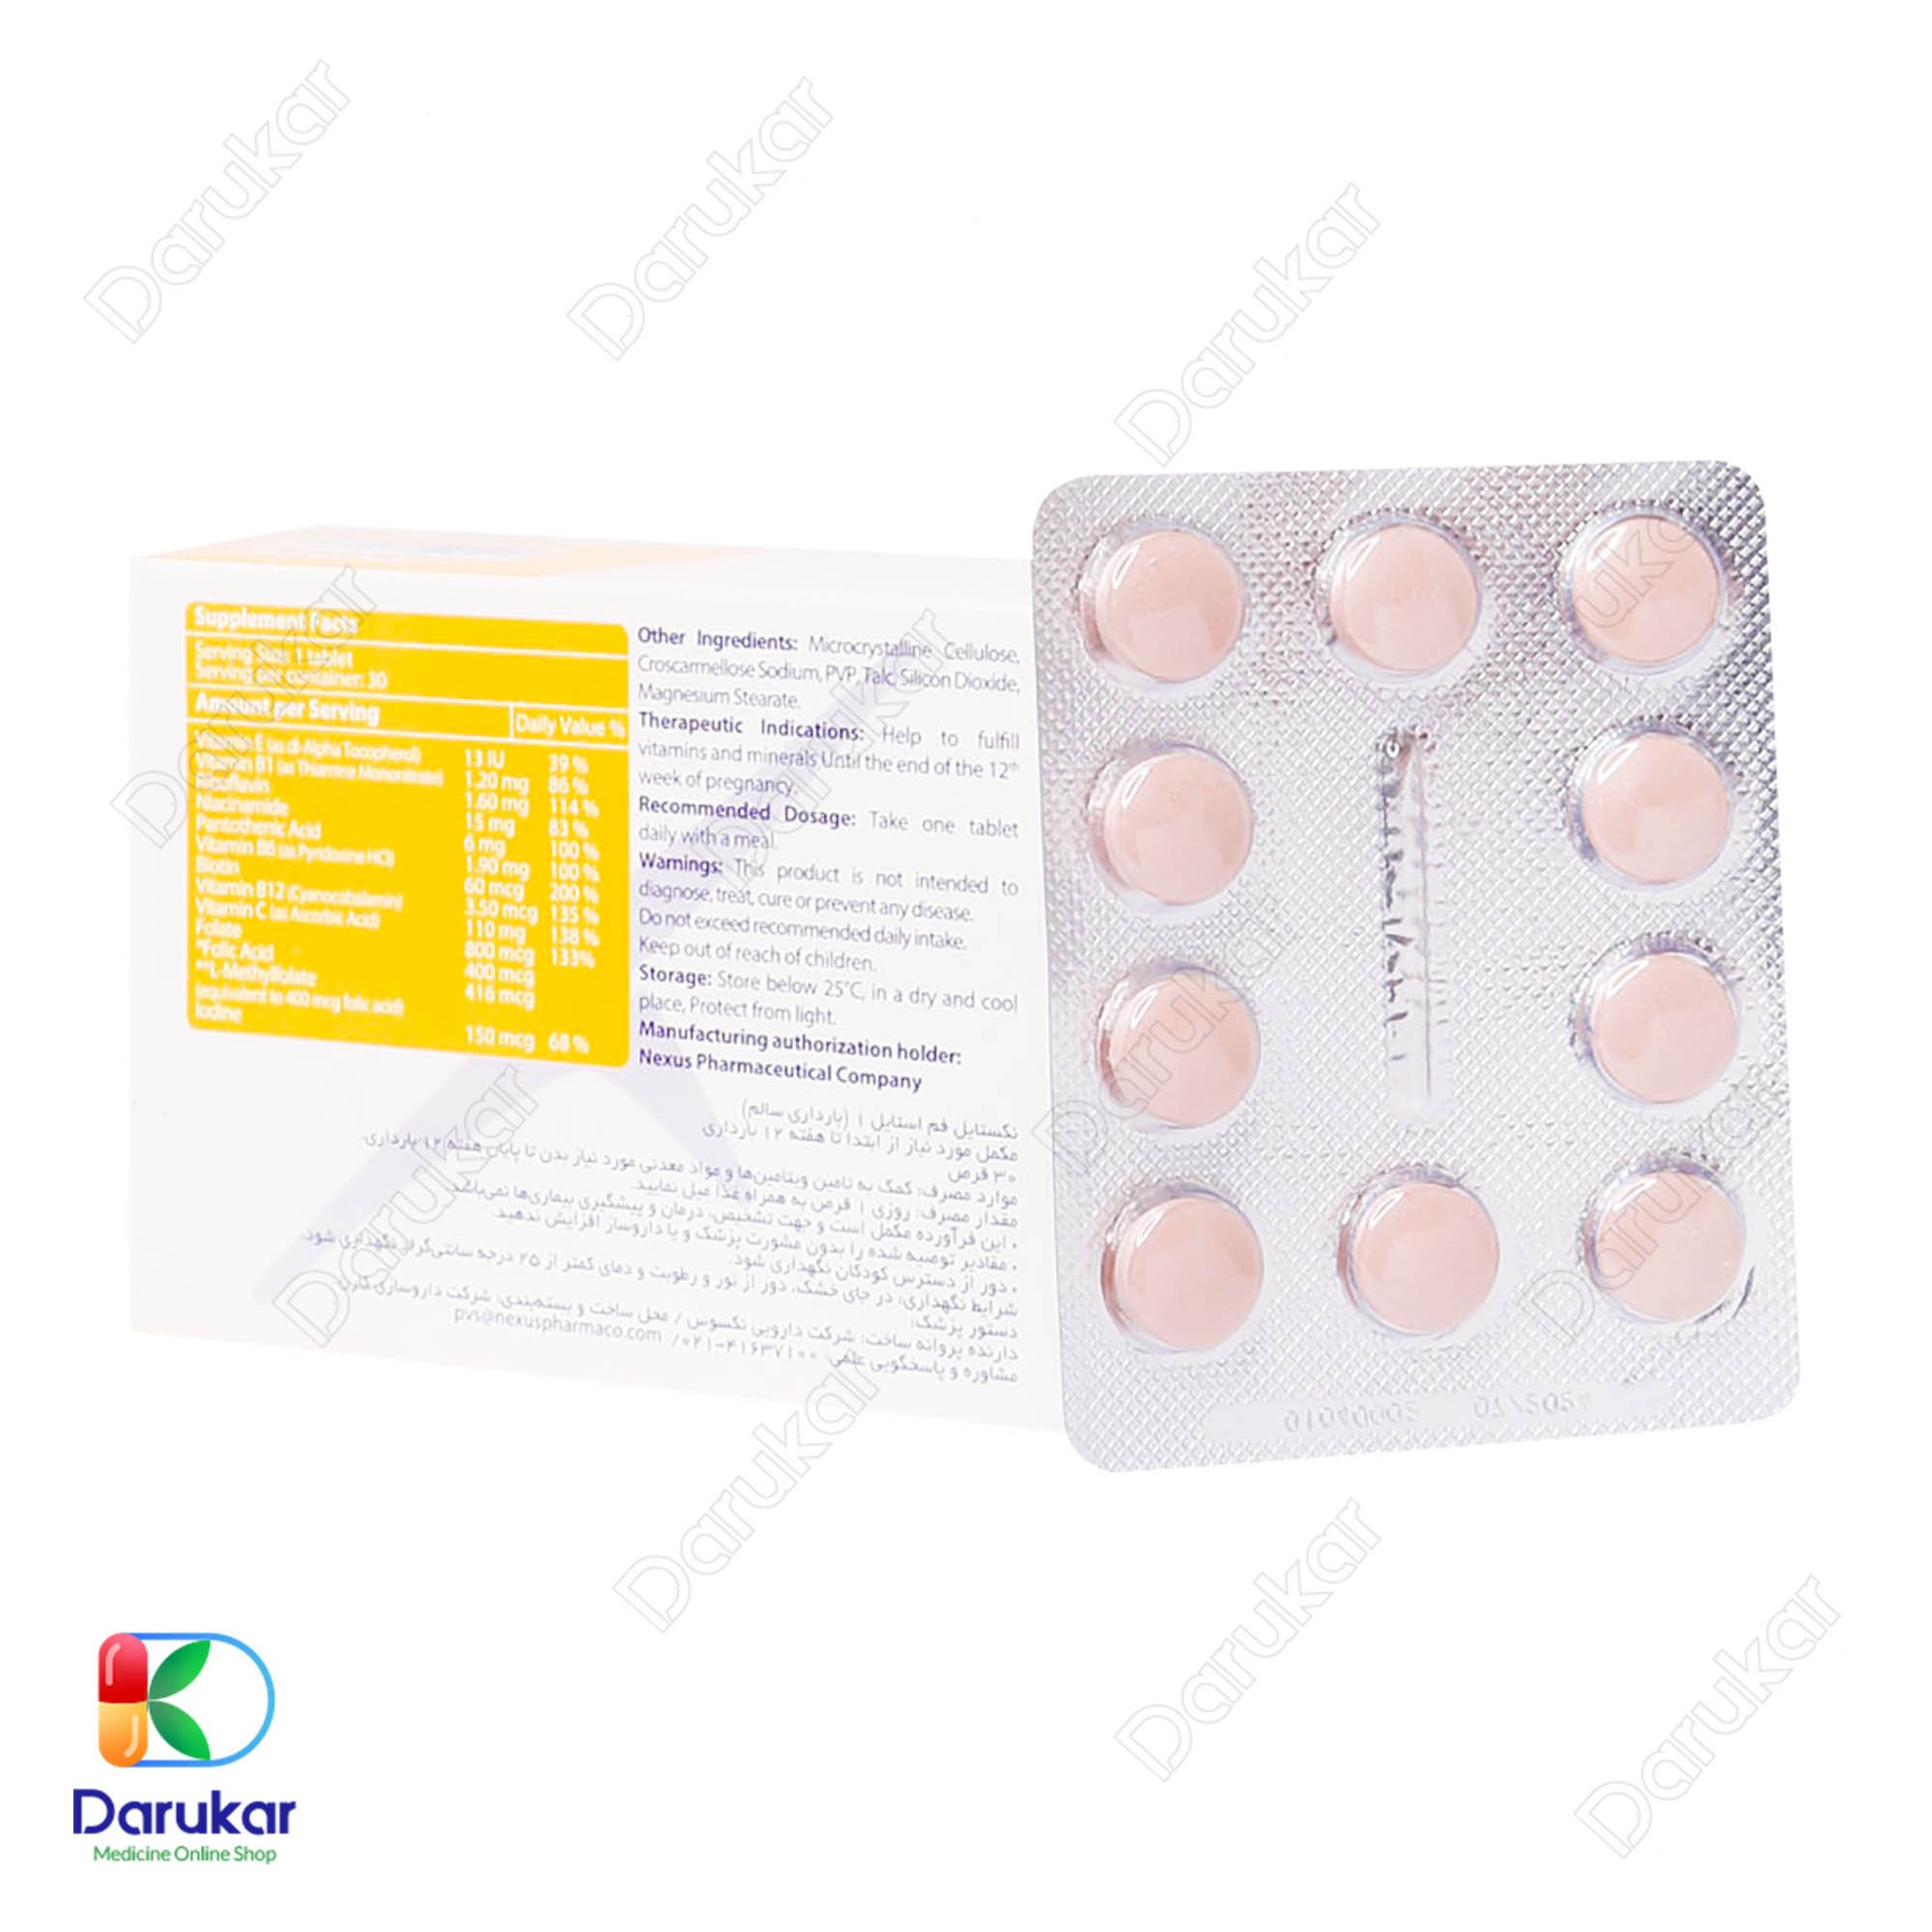 Nextyle Femstyle one 30 Tablets 1